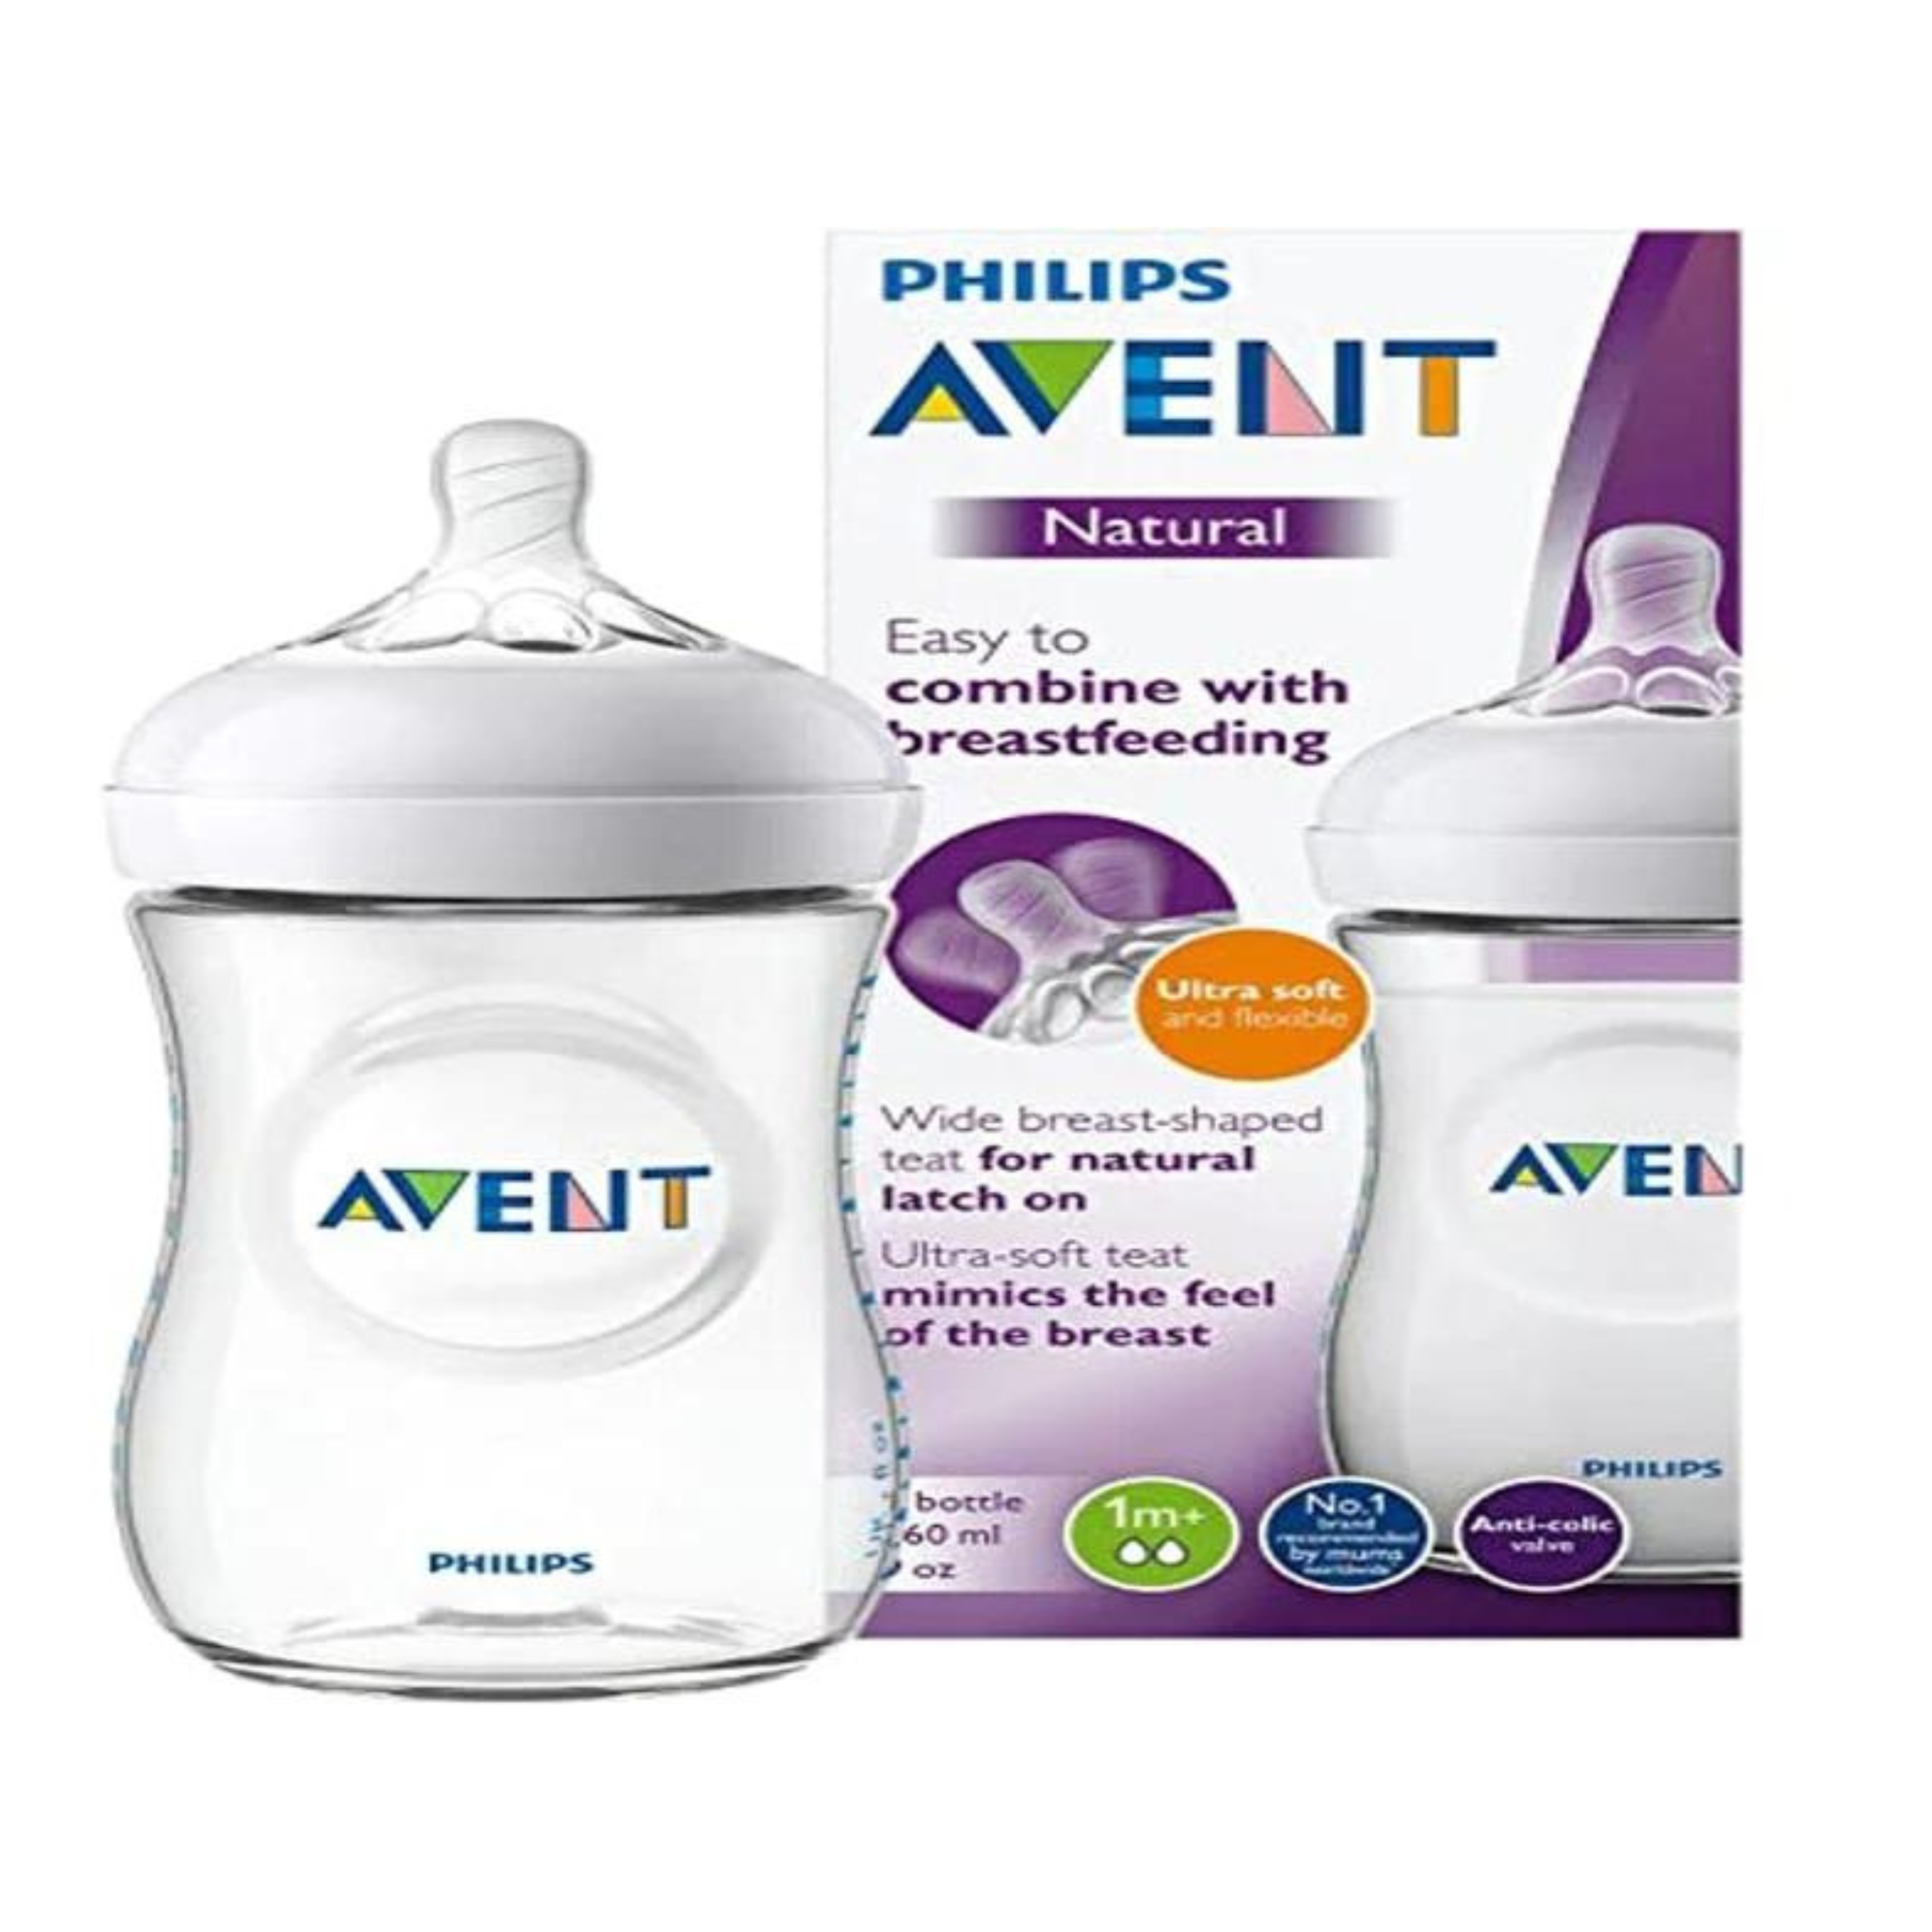 Philips Avent Natural Baby Bottle, 125 ml, Pack Of 2